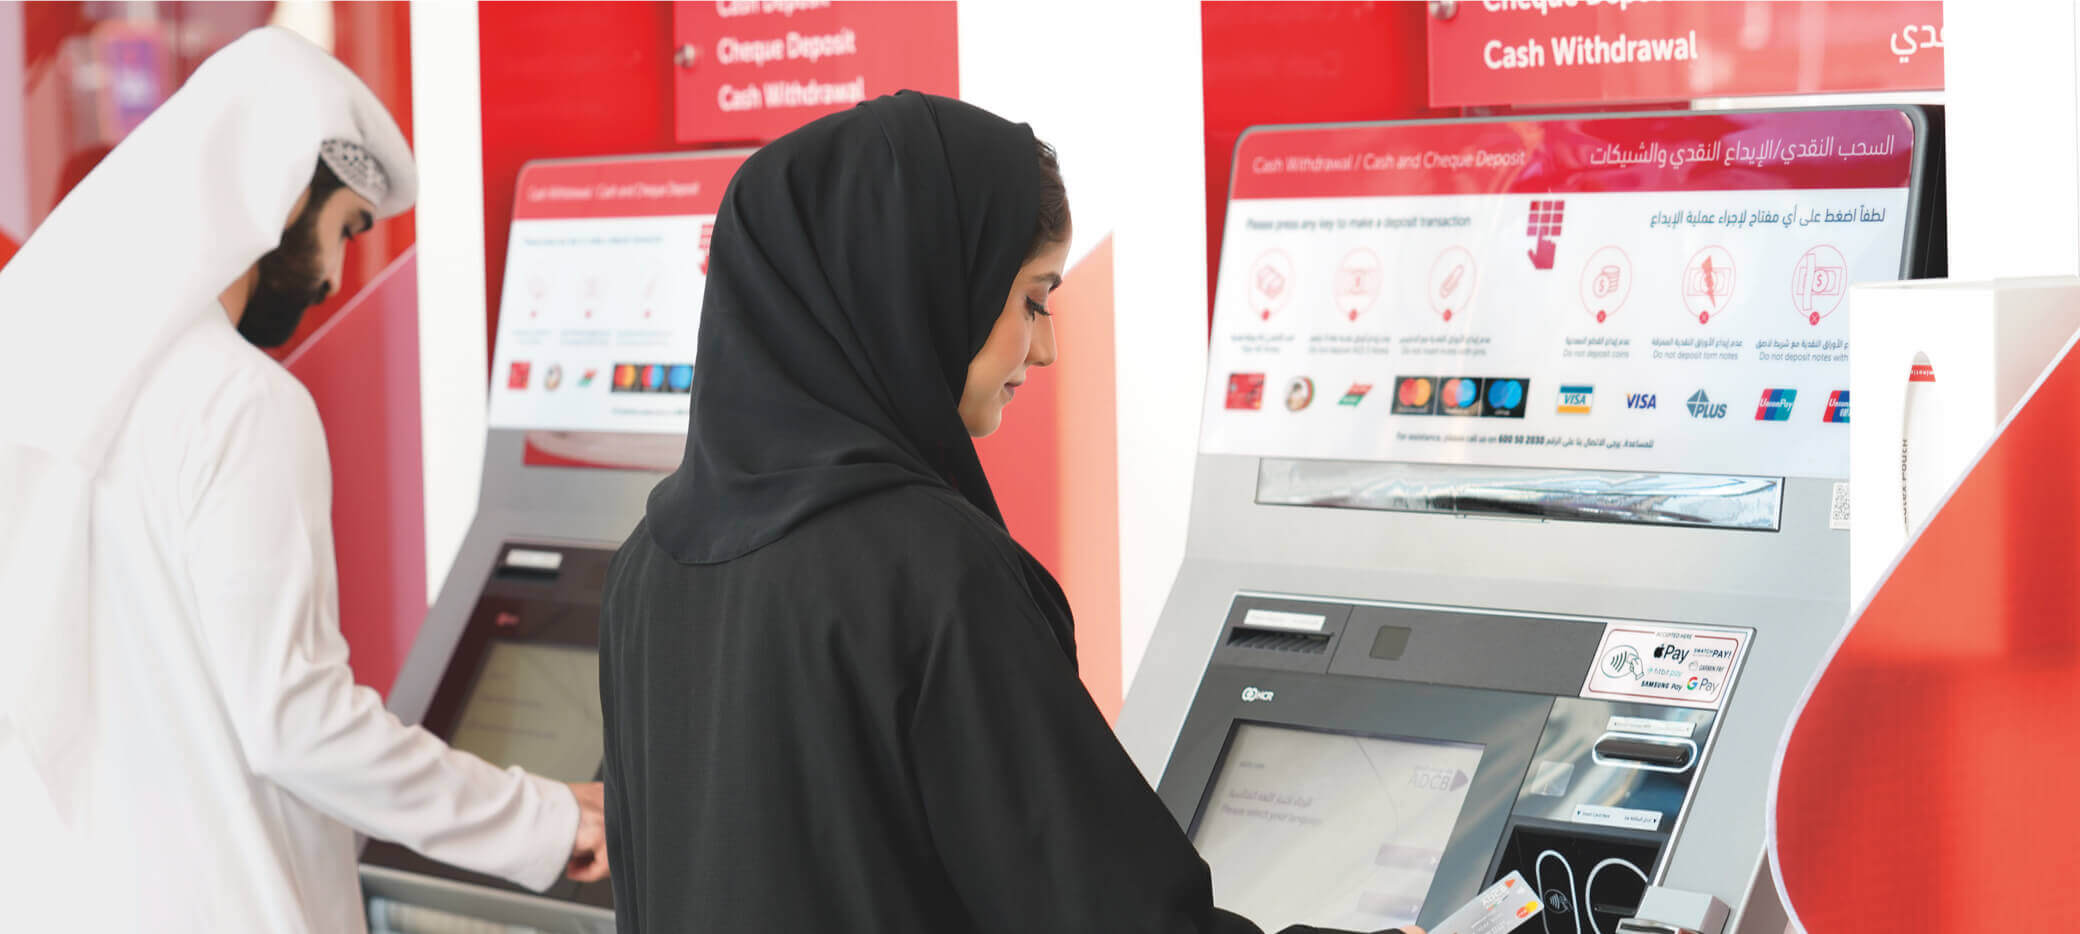 Two people using automated teller machines.